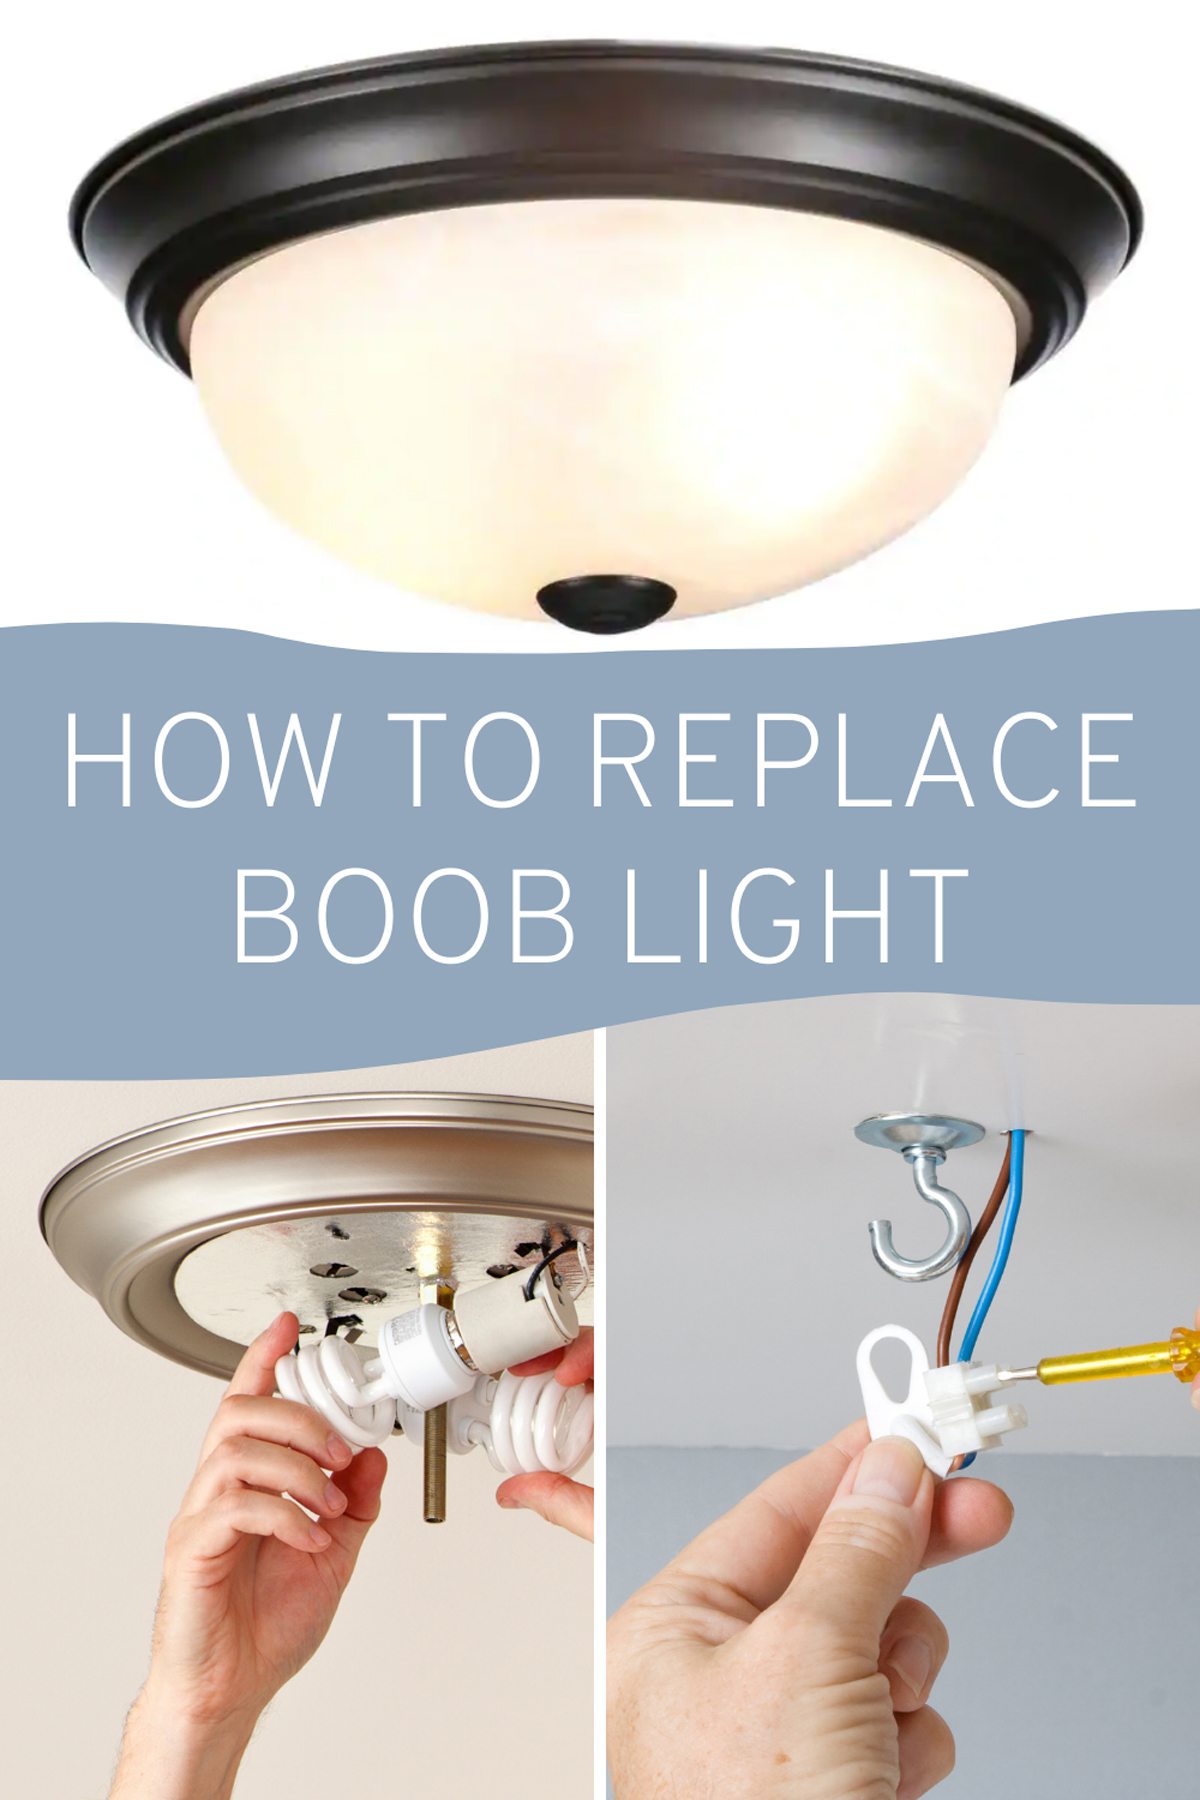 How To Replace Boob Light